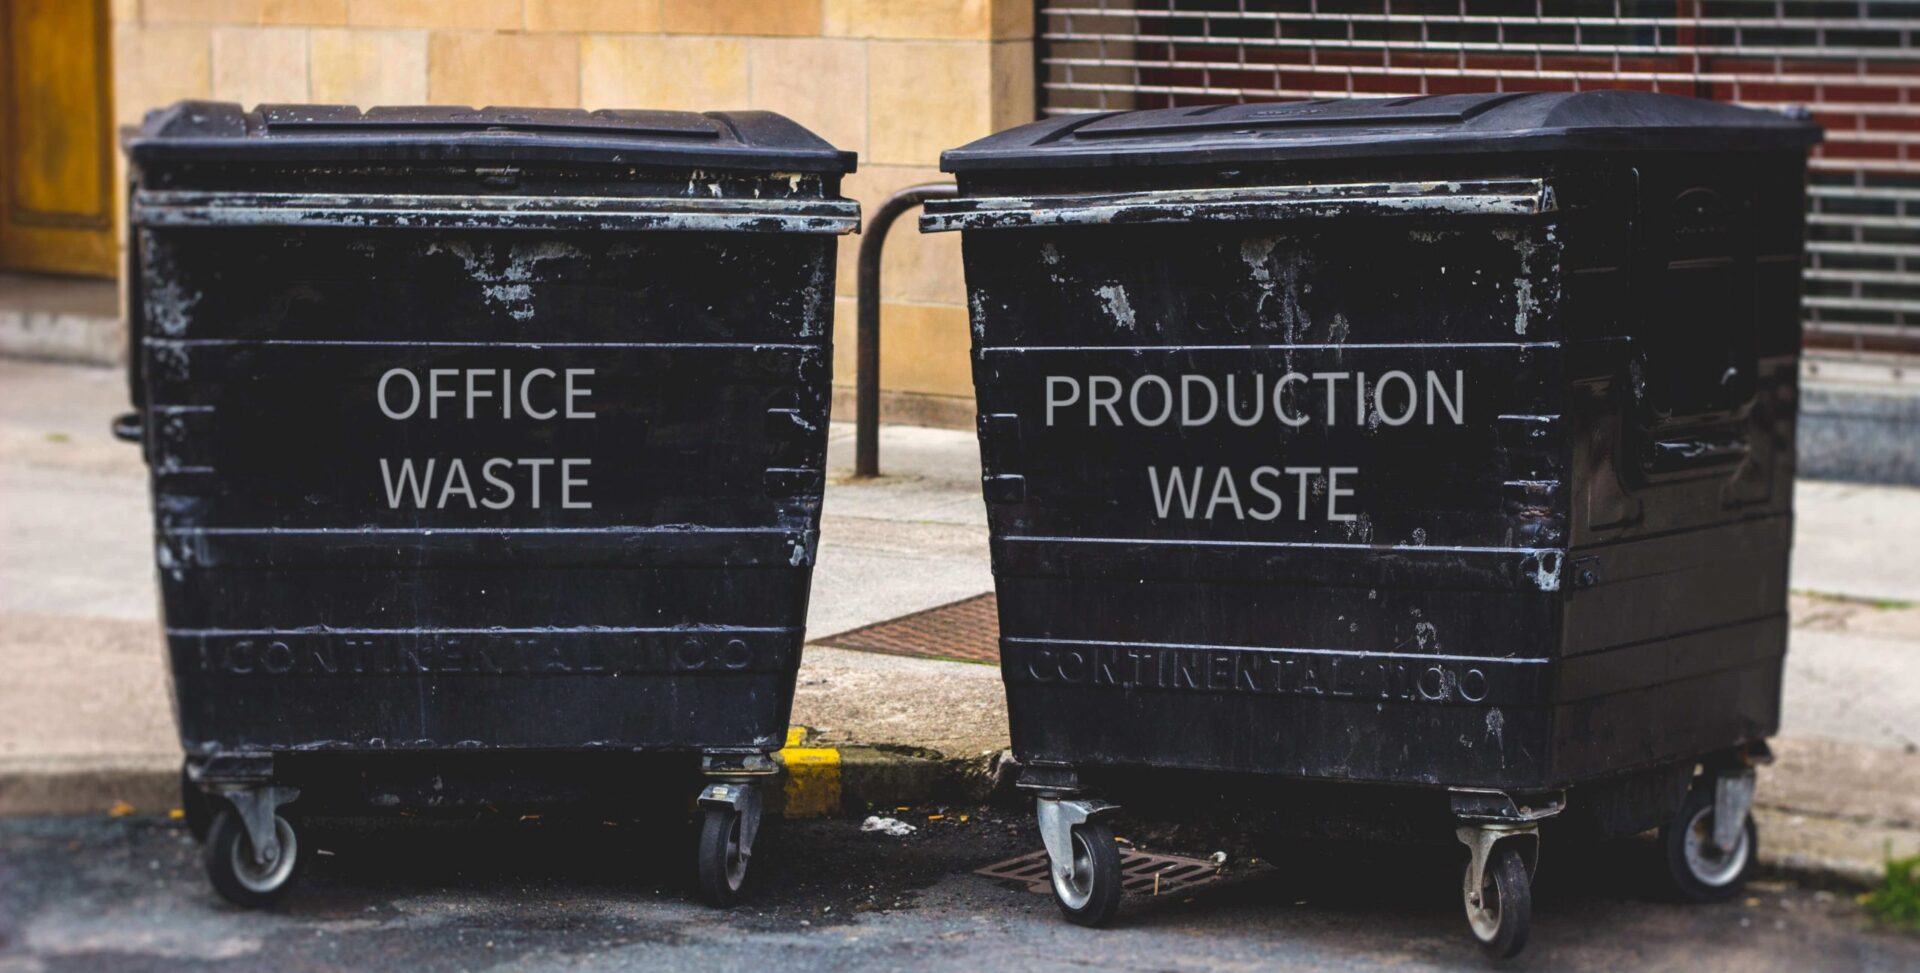 two large garbage cans on the first one is written OFFICE WASTE and on the second is written Production Waste